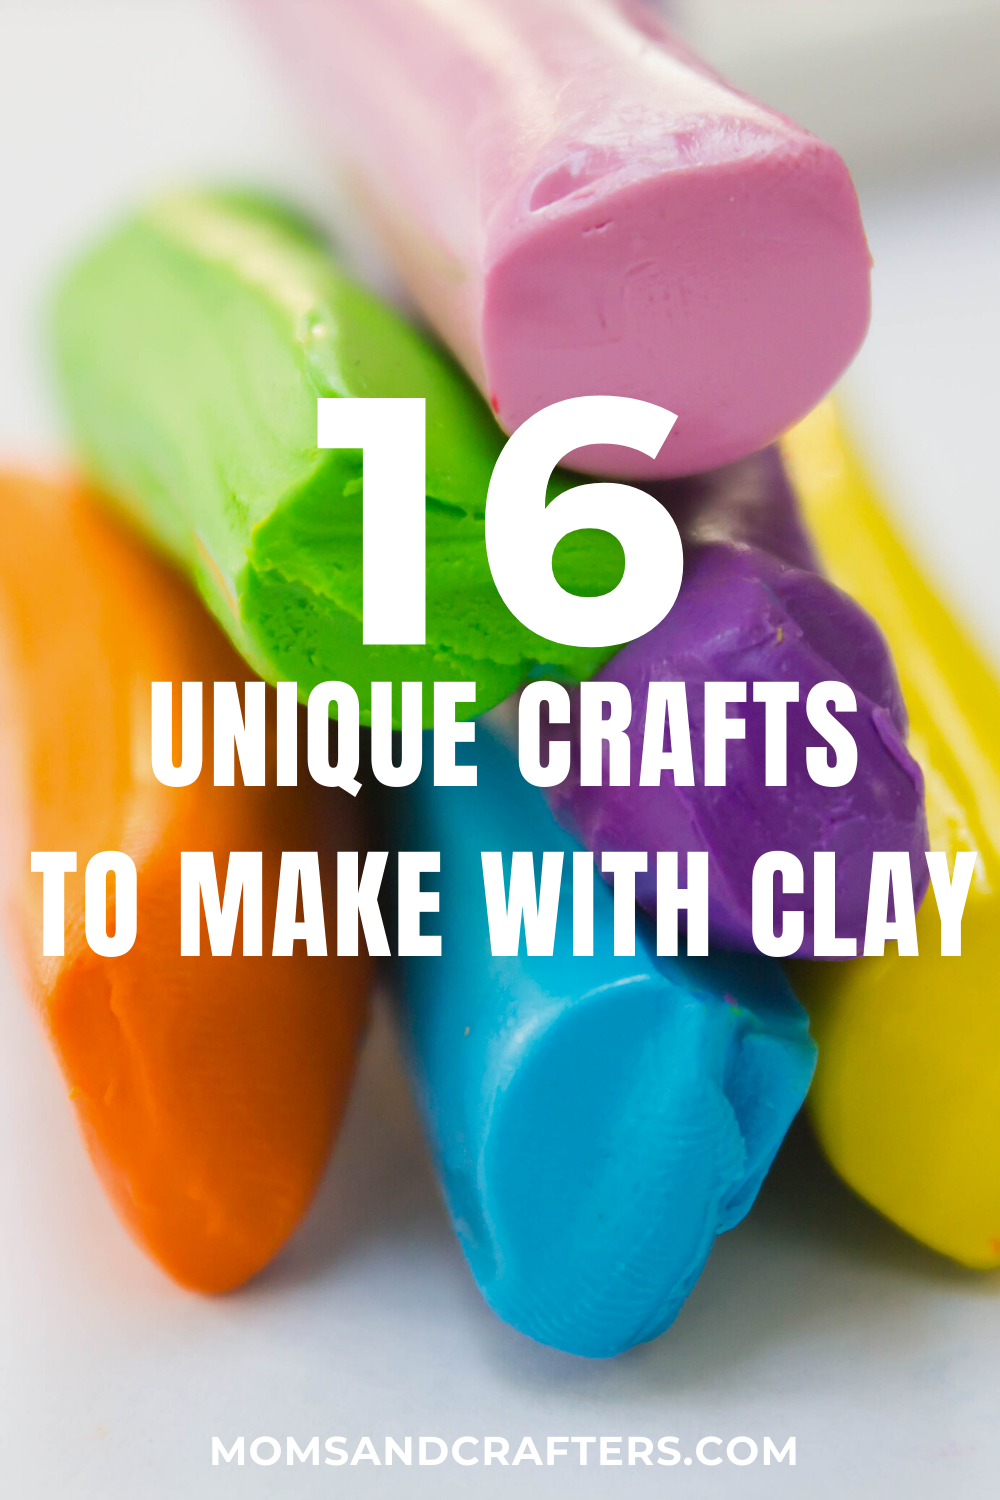 Things to Make with Clay - Air Dry, Polymer, & More!